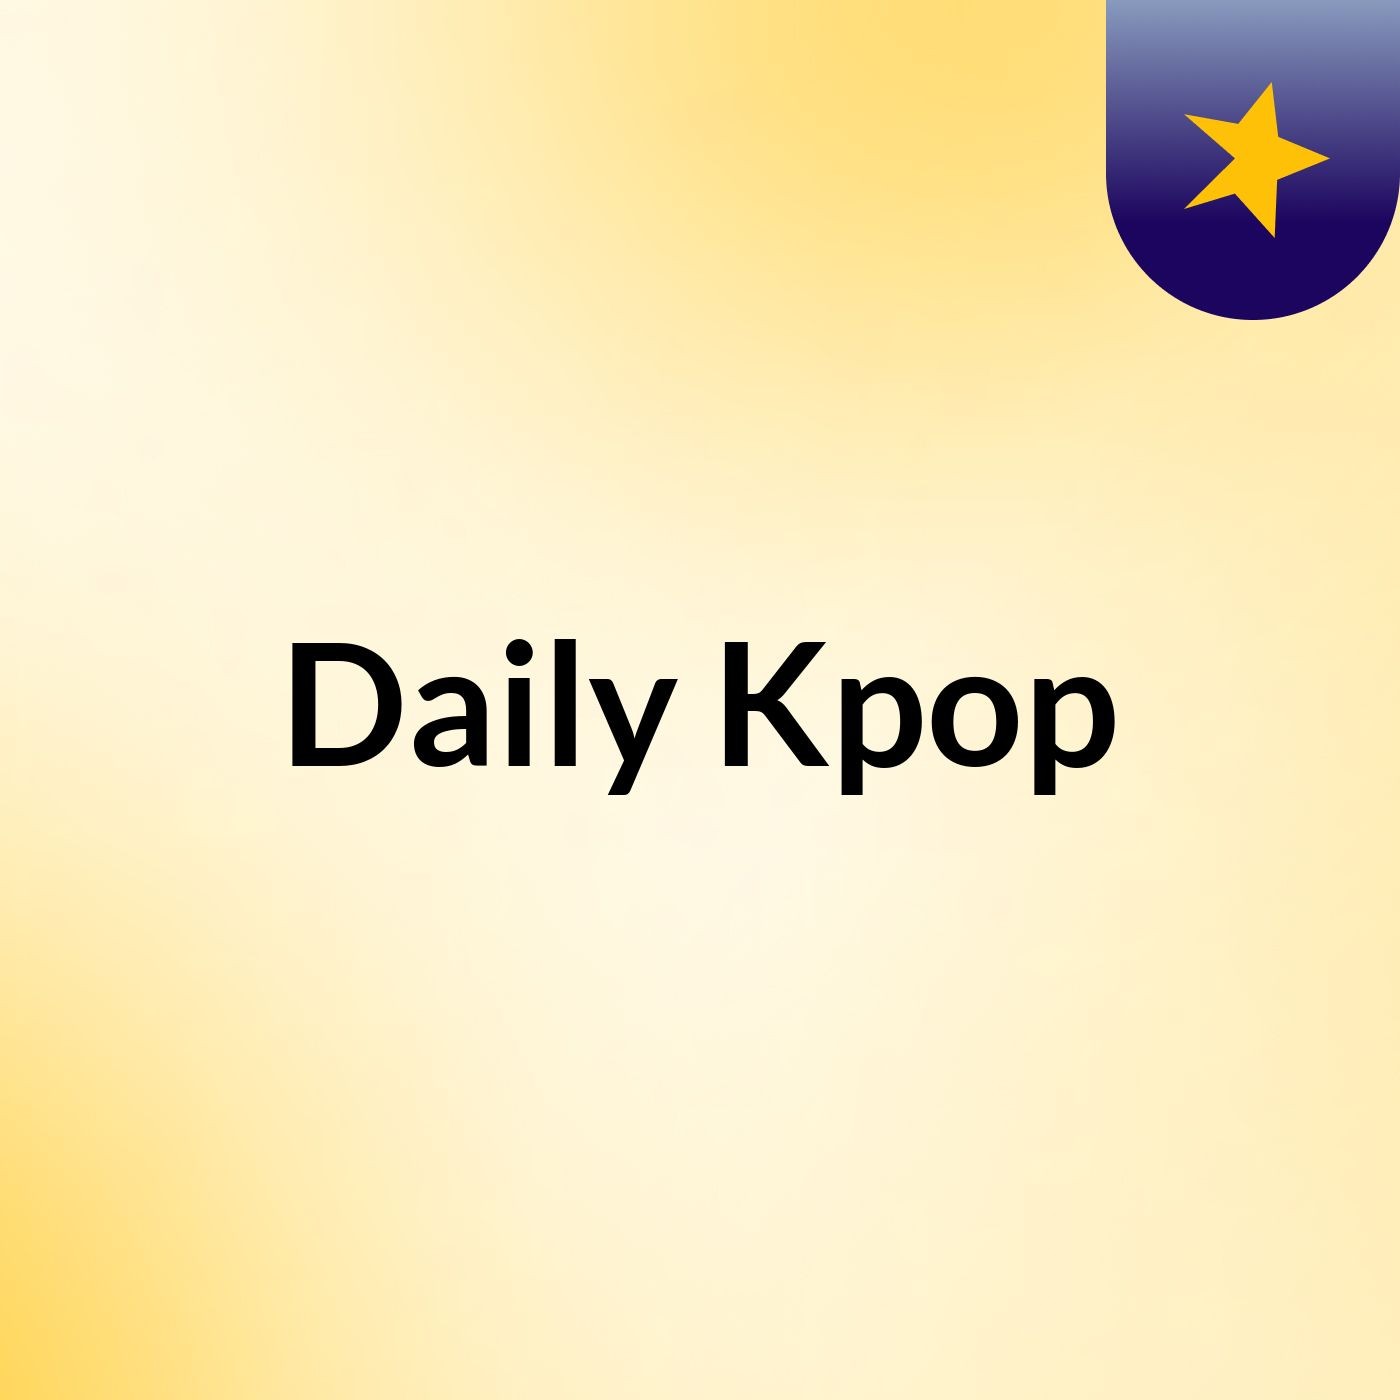 Episode 4 - Daily Kpop